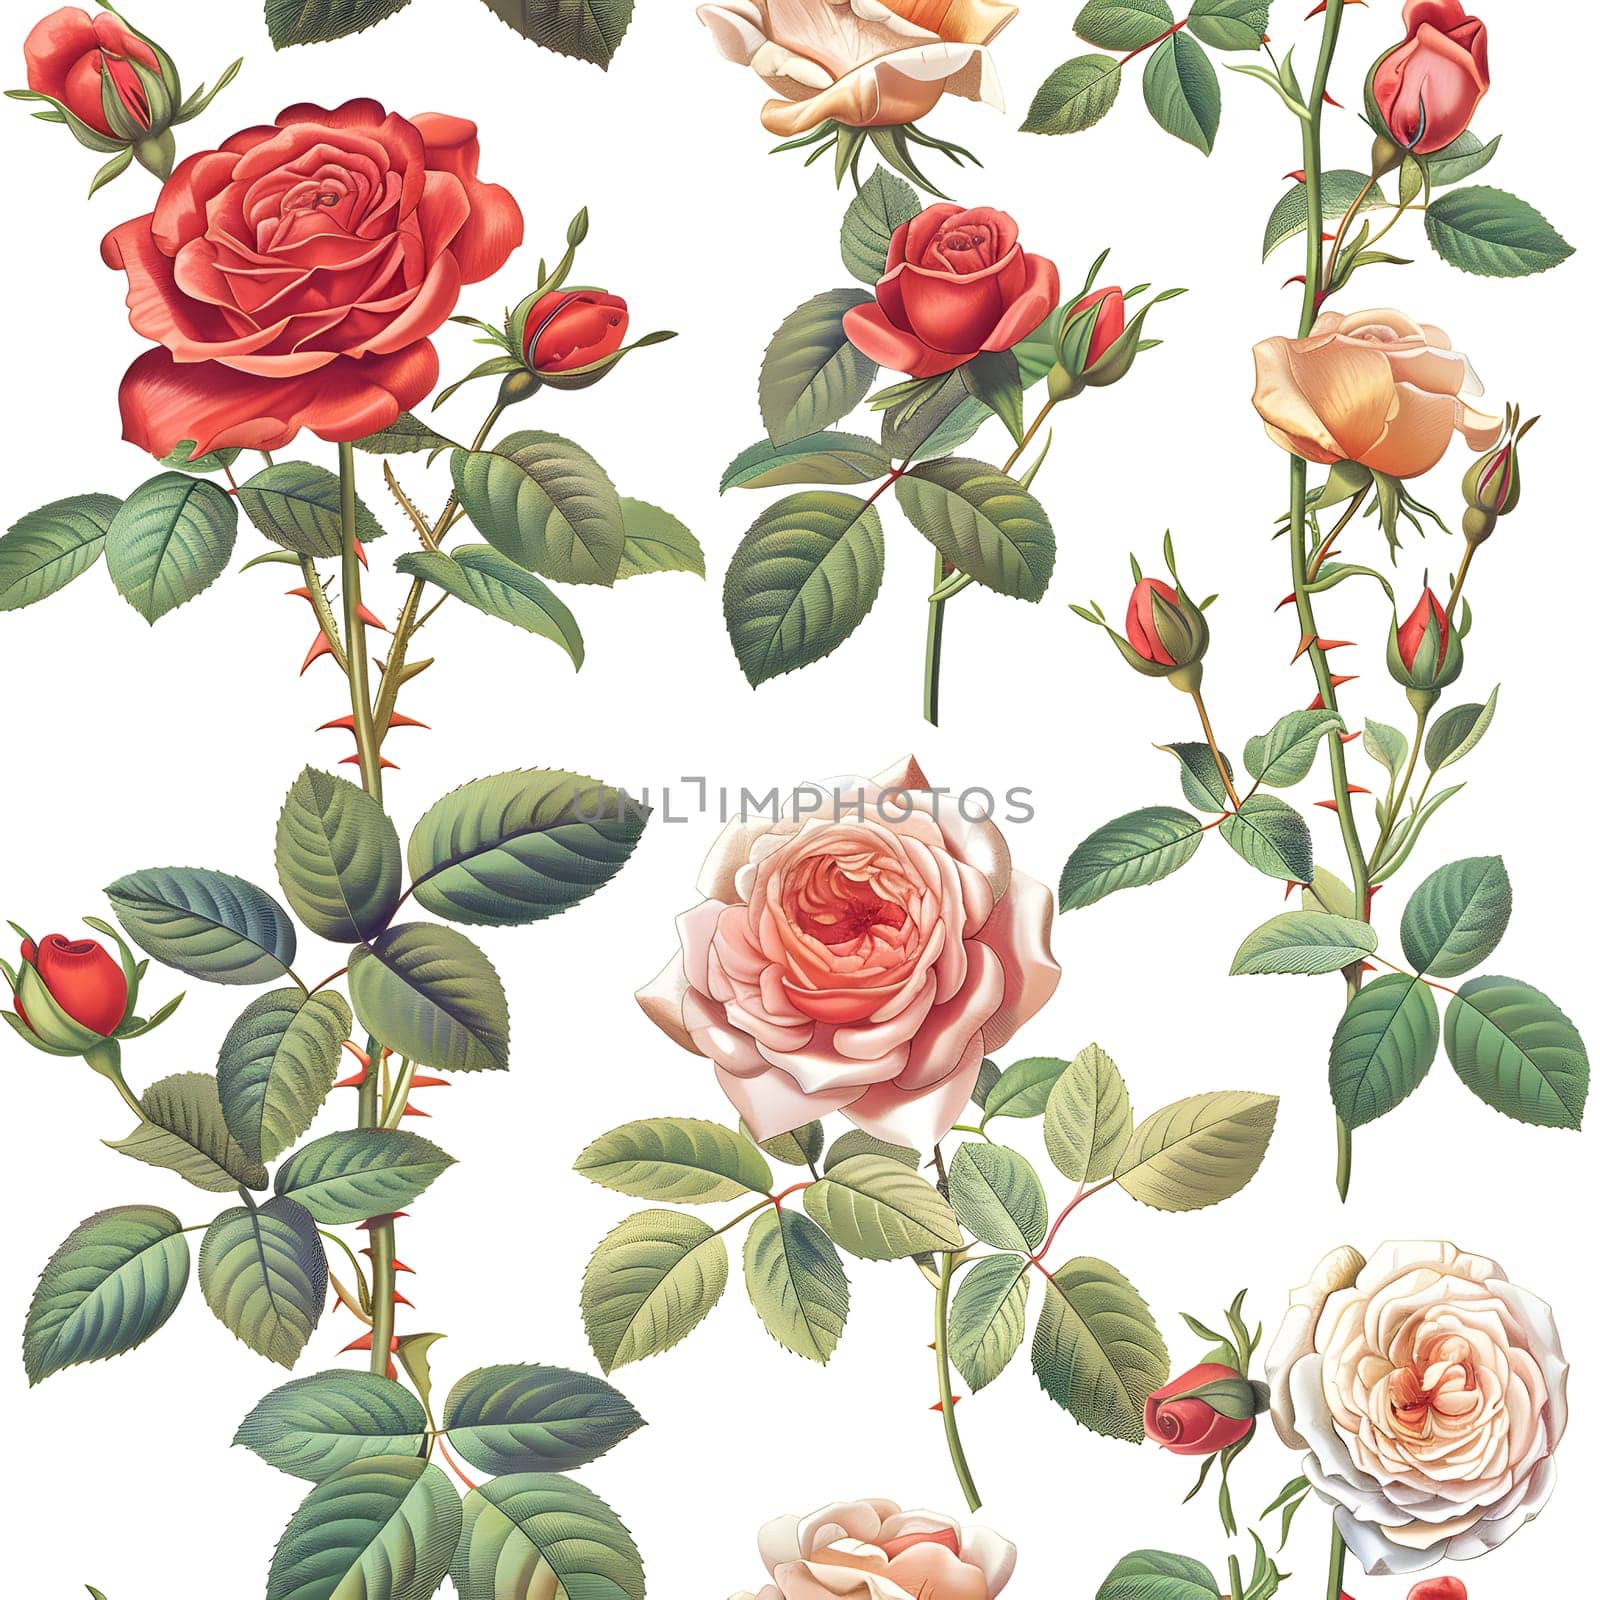 A beautiful seamless pattern featuring hybrid tea roses with green leaves on a white background. Perfect for flower enthusiasts, botany lovers, or anyone who appreciates the beauty of roses